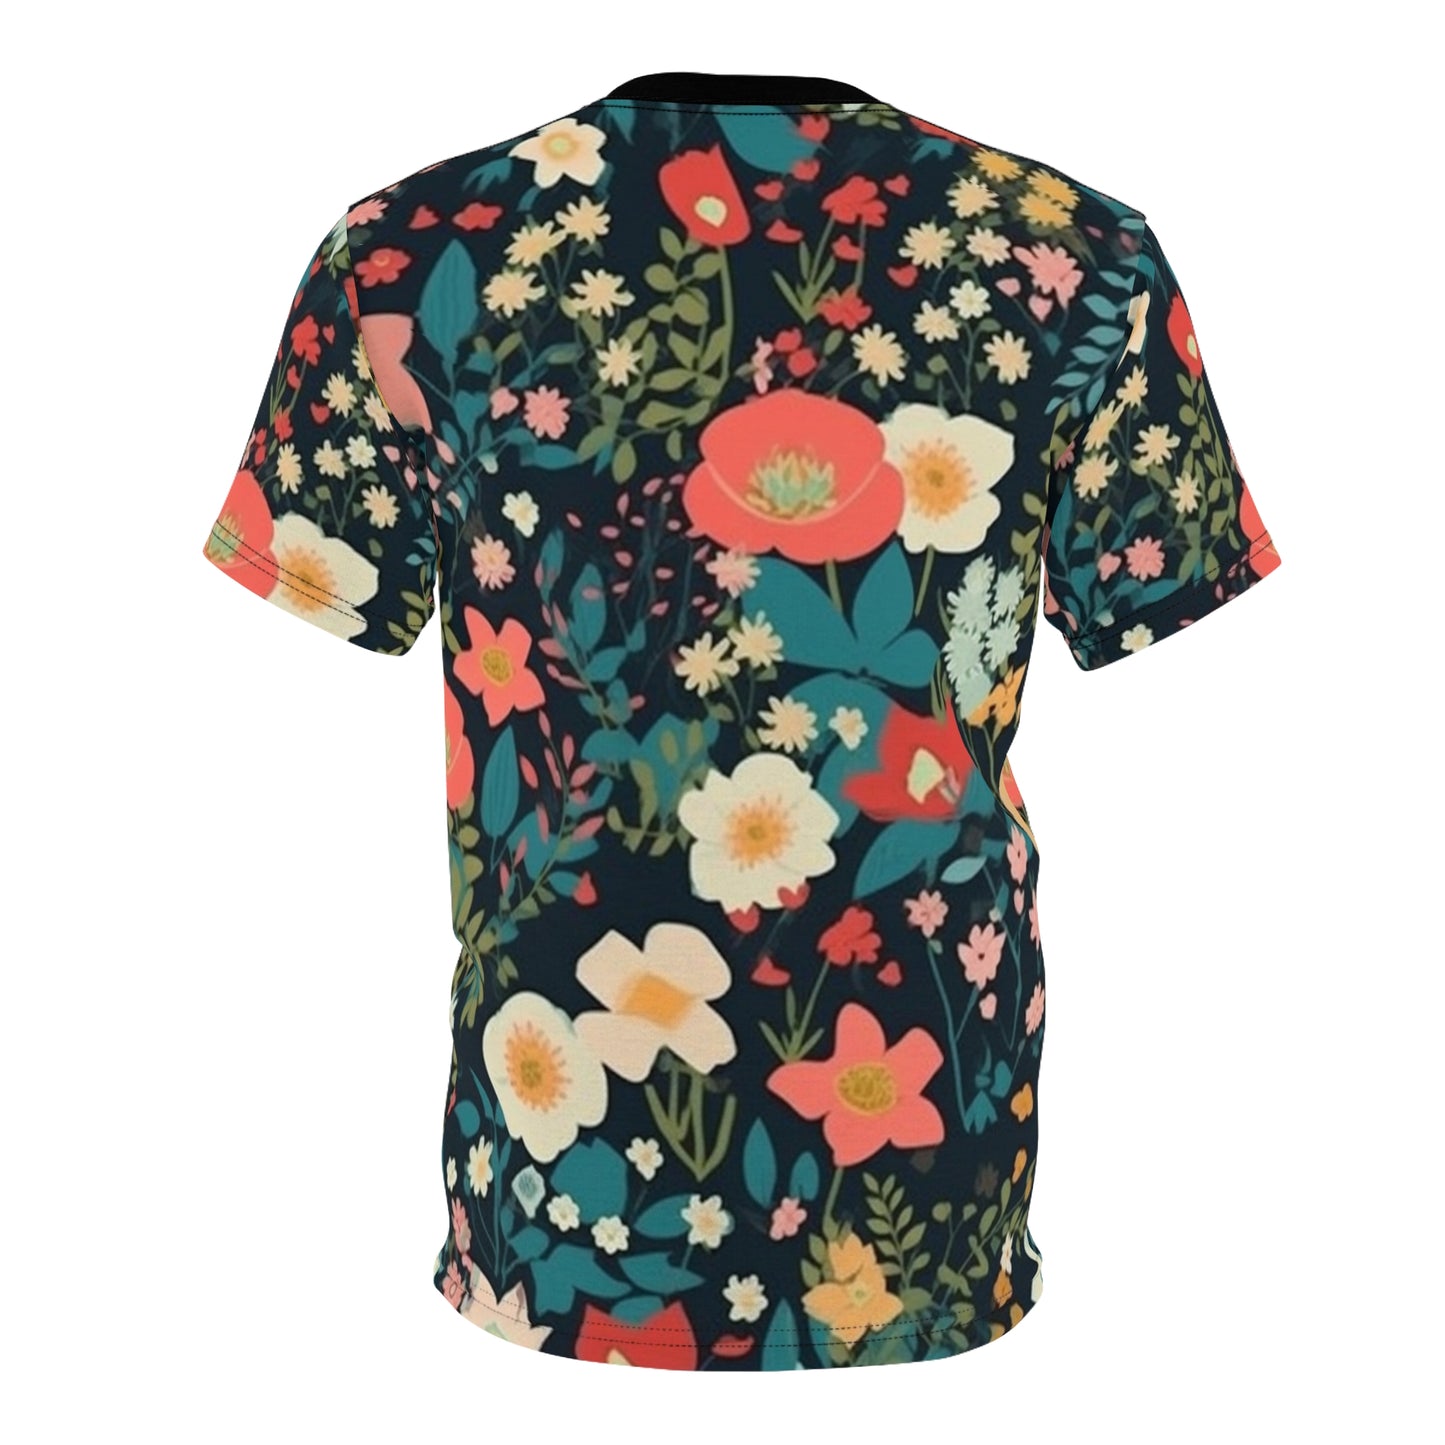 Floral Design, Abstract Style, Unisex Cut & Sew Tee